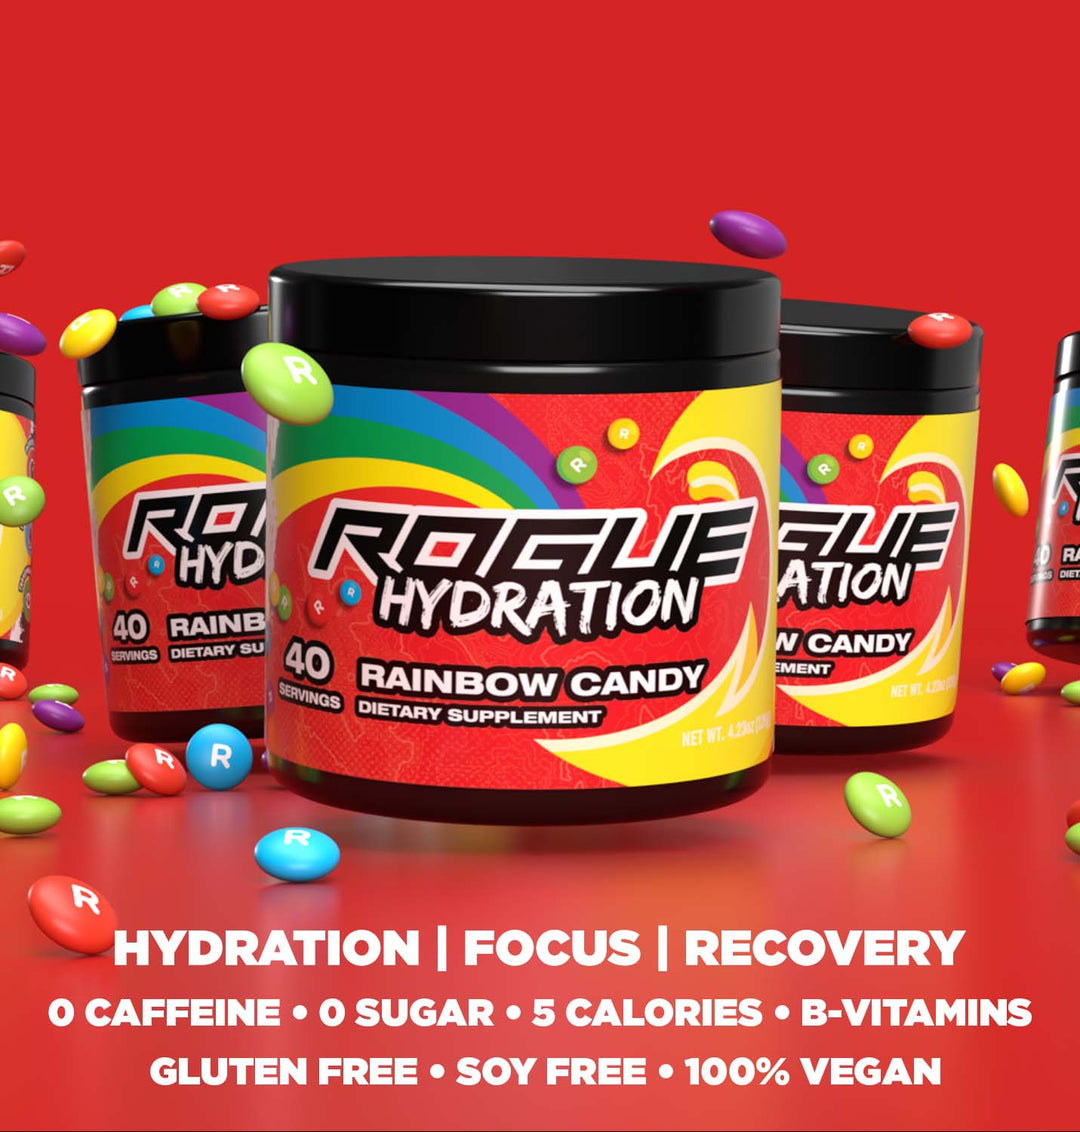 Rainbow Candy Rogue Hydration by Rogue Energy